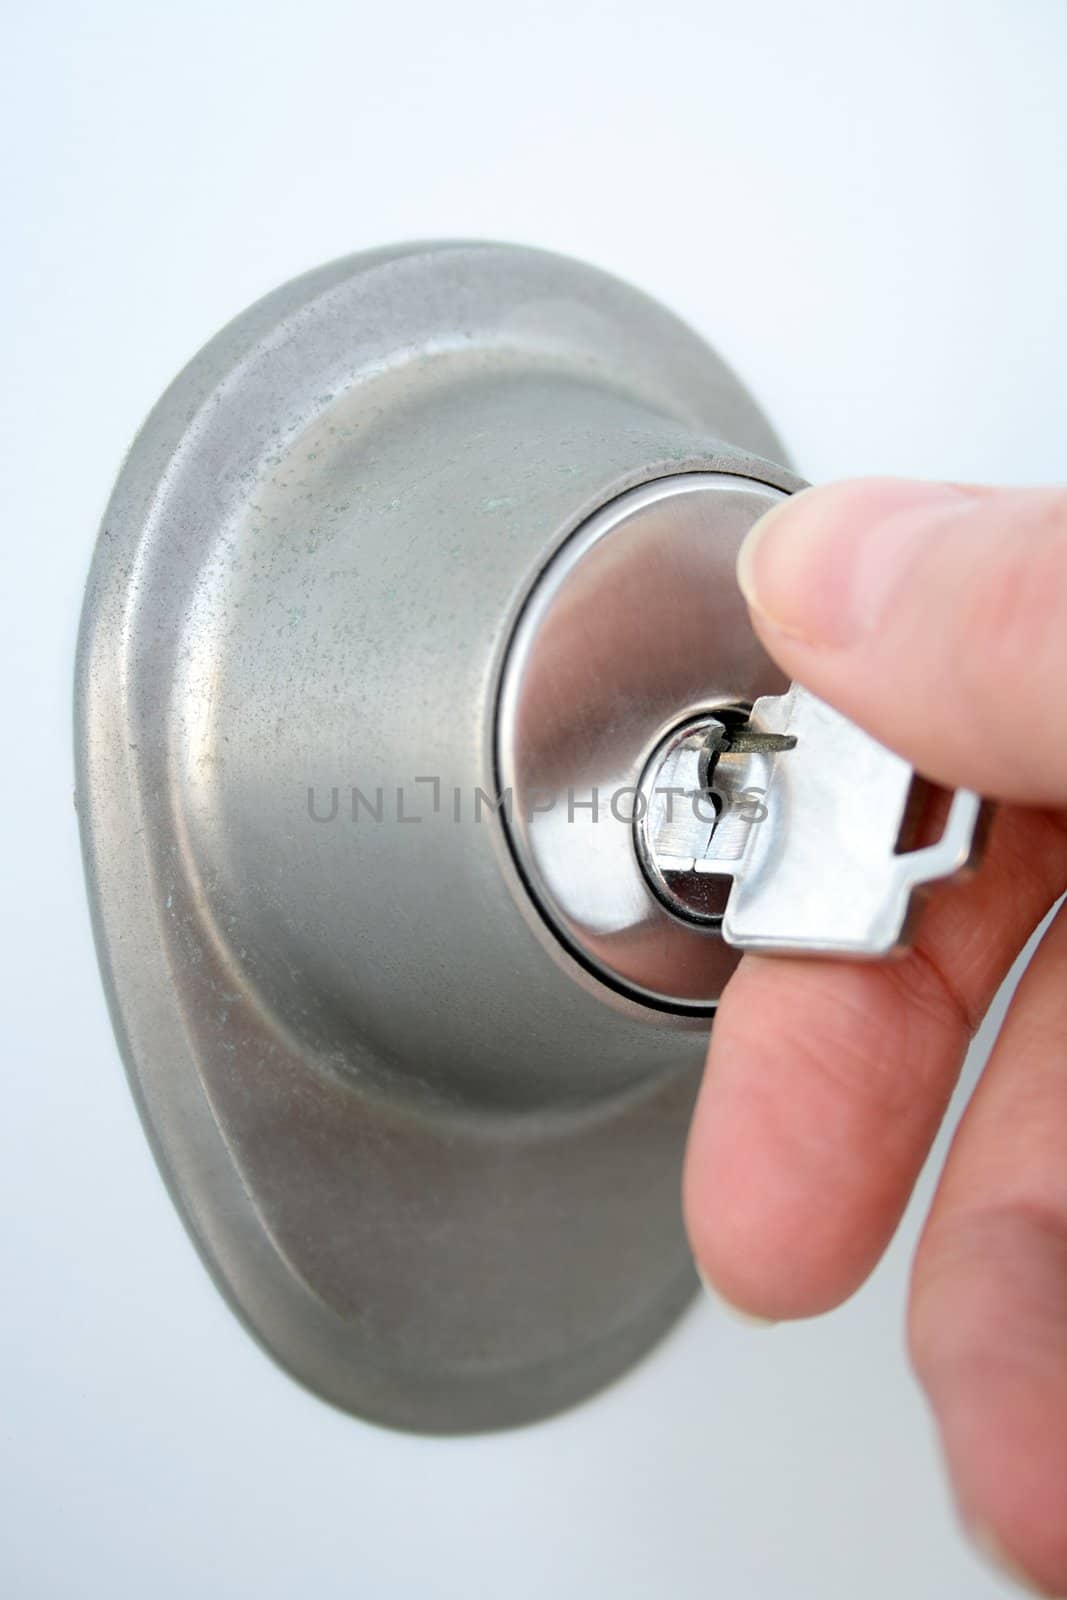 Woman's hand unlocking the door with a key. Focus on the keyhole.